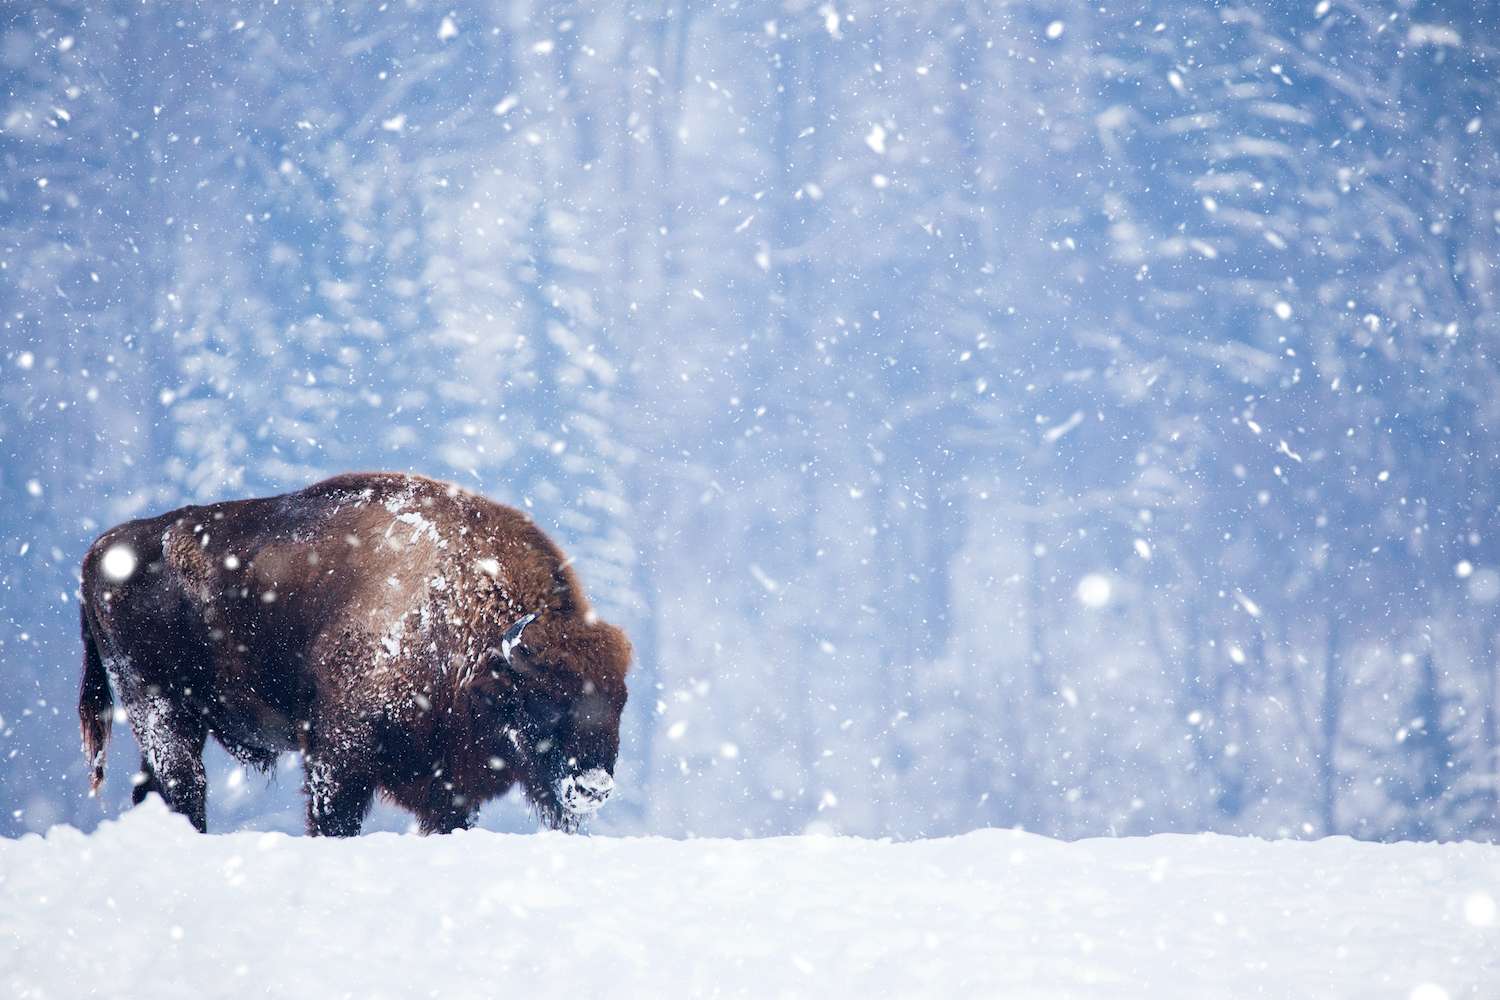 Bison in heavy winter and snow Yellowstone National Park 